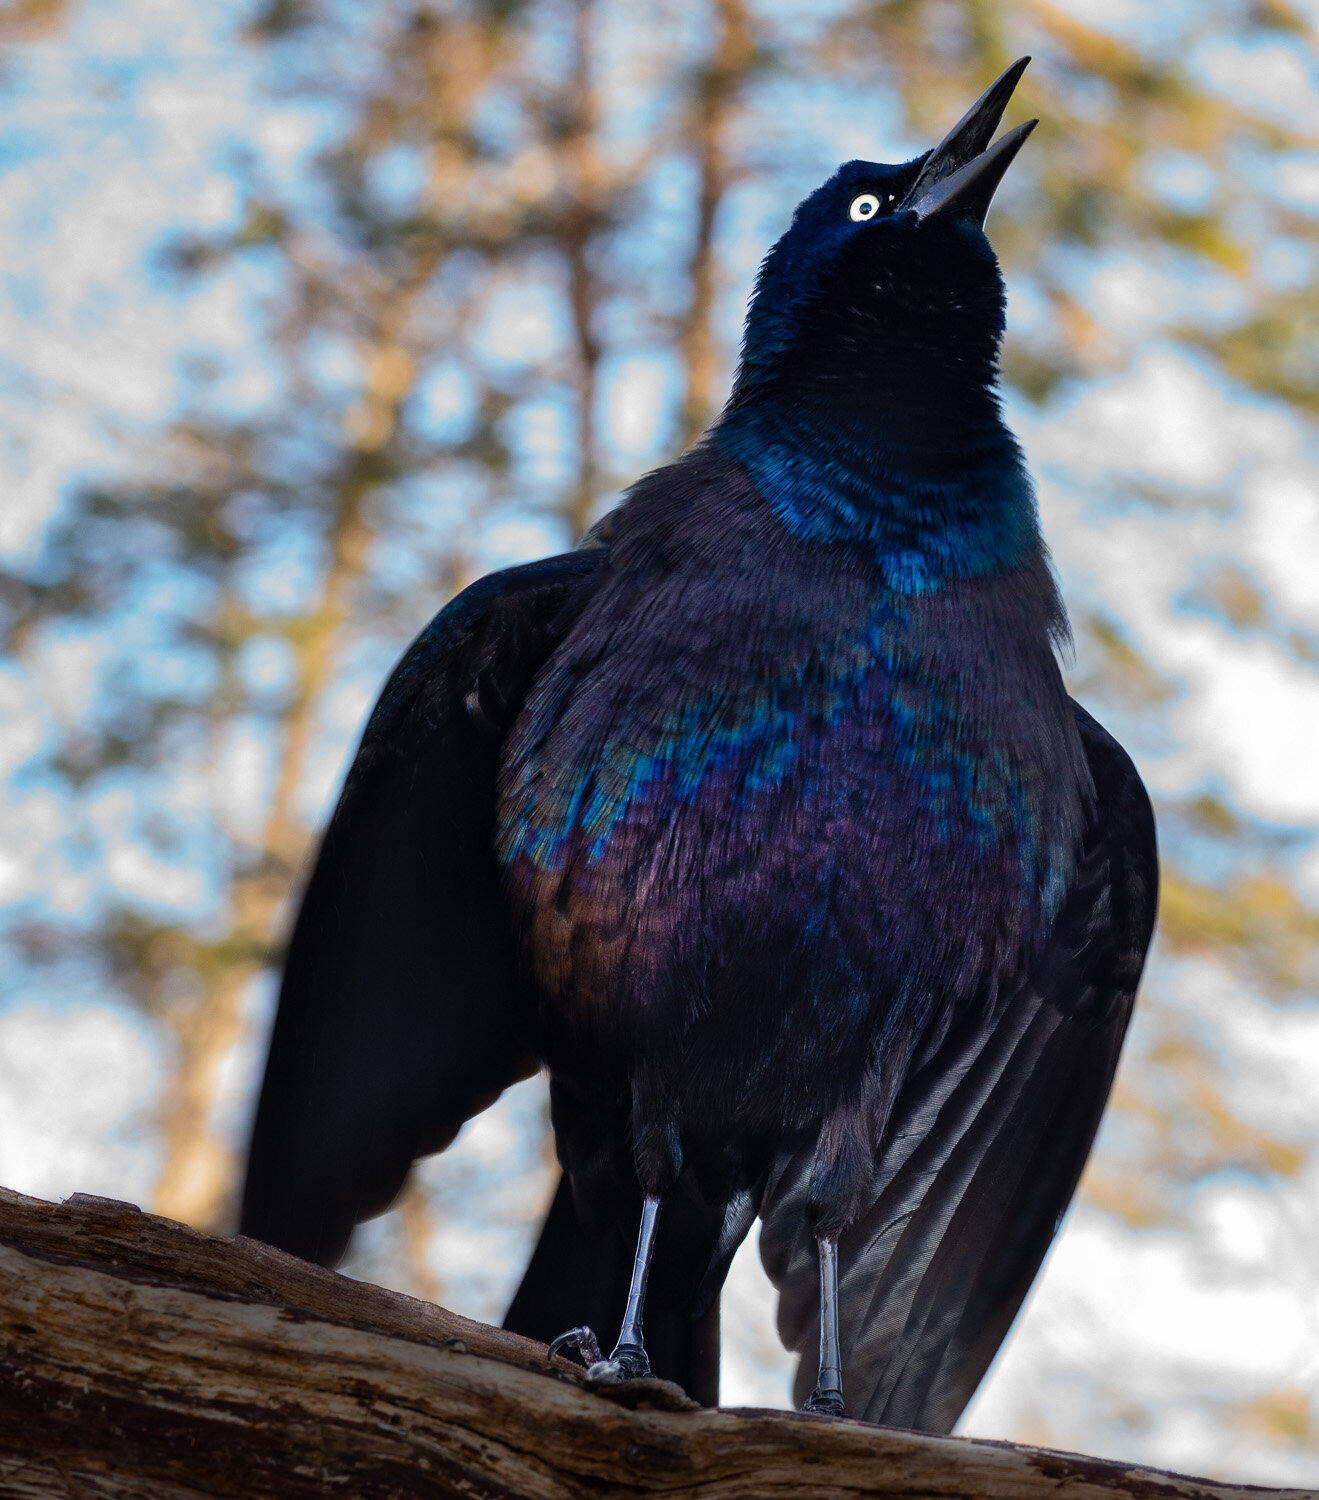 Grackle Ruffles His Feathers